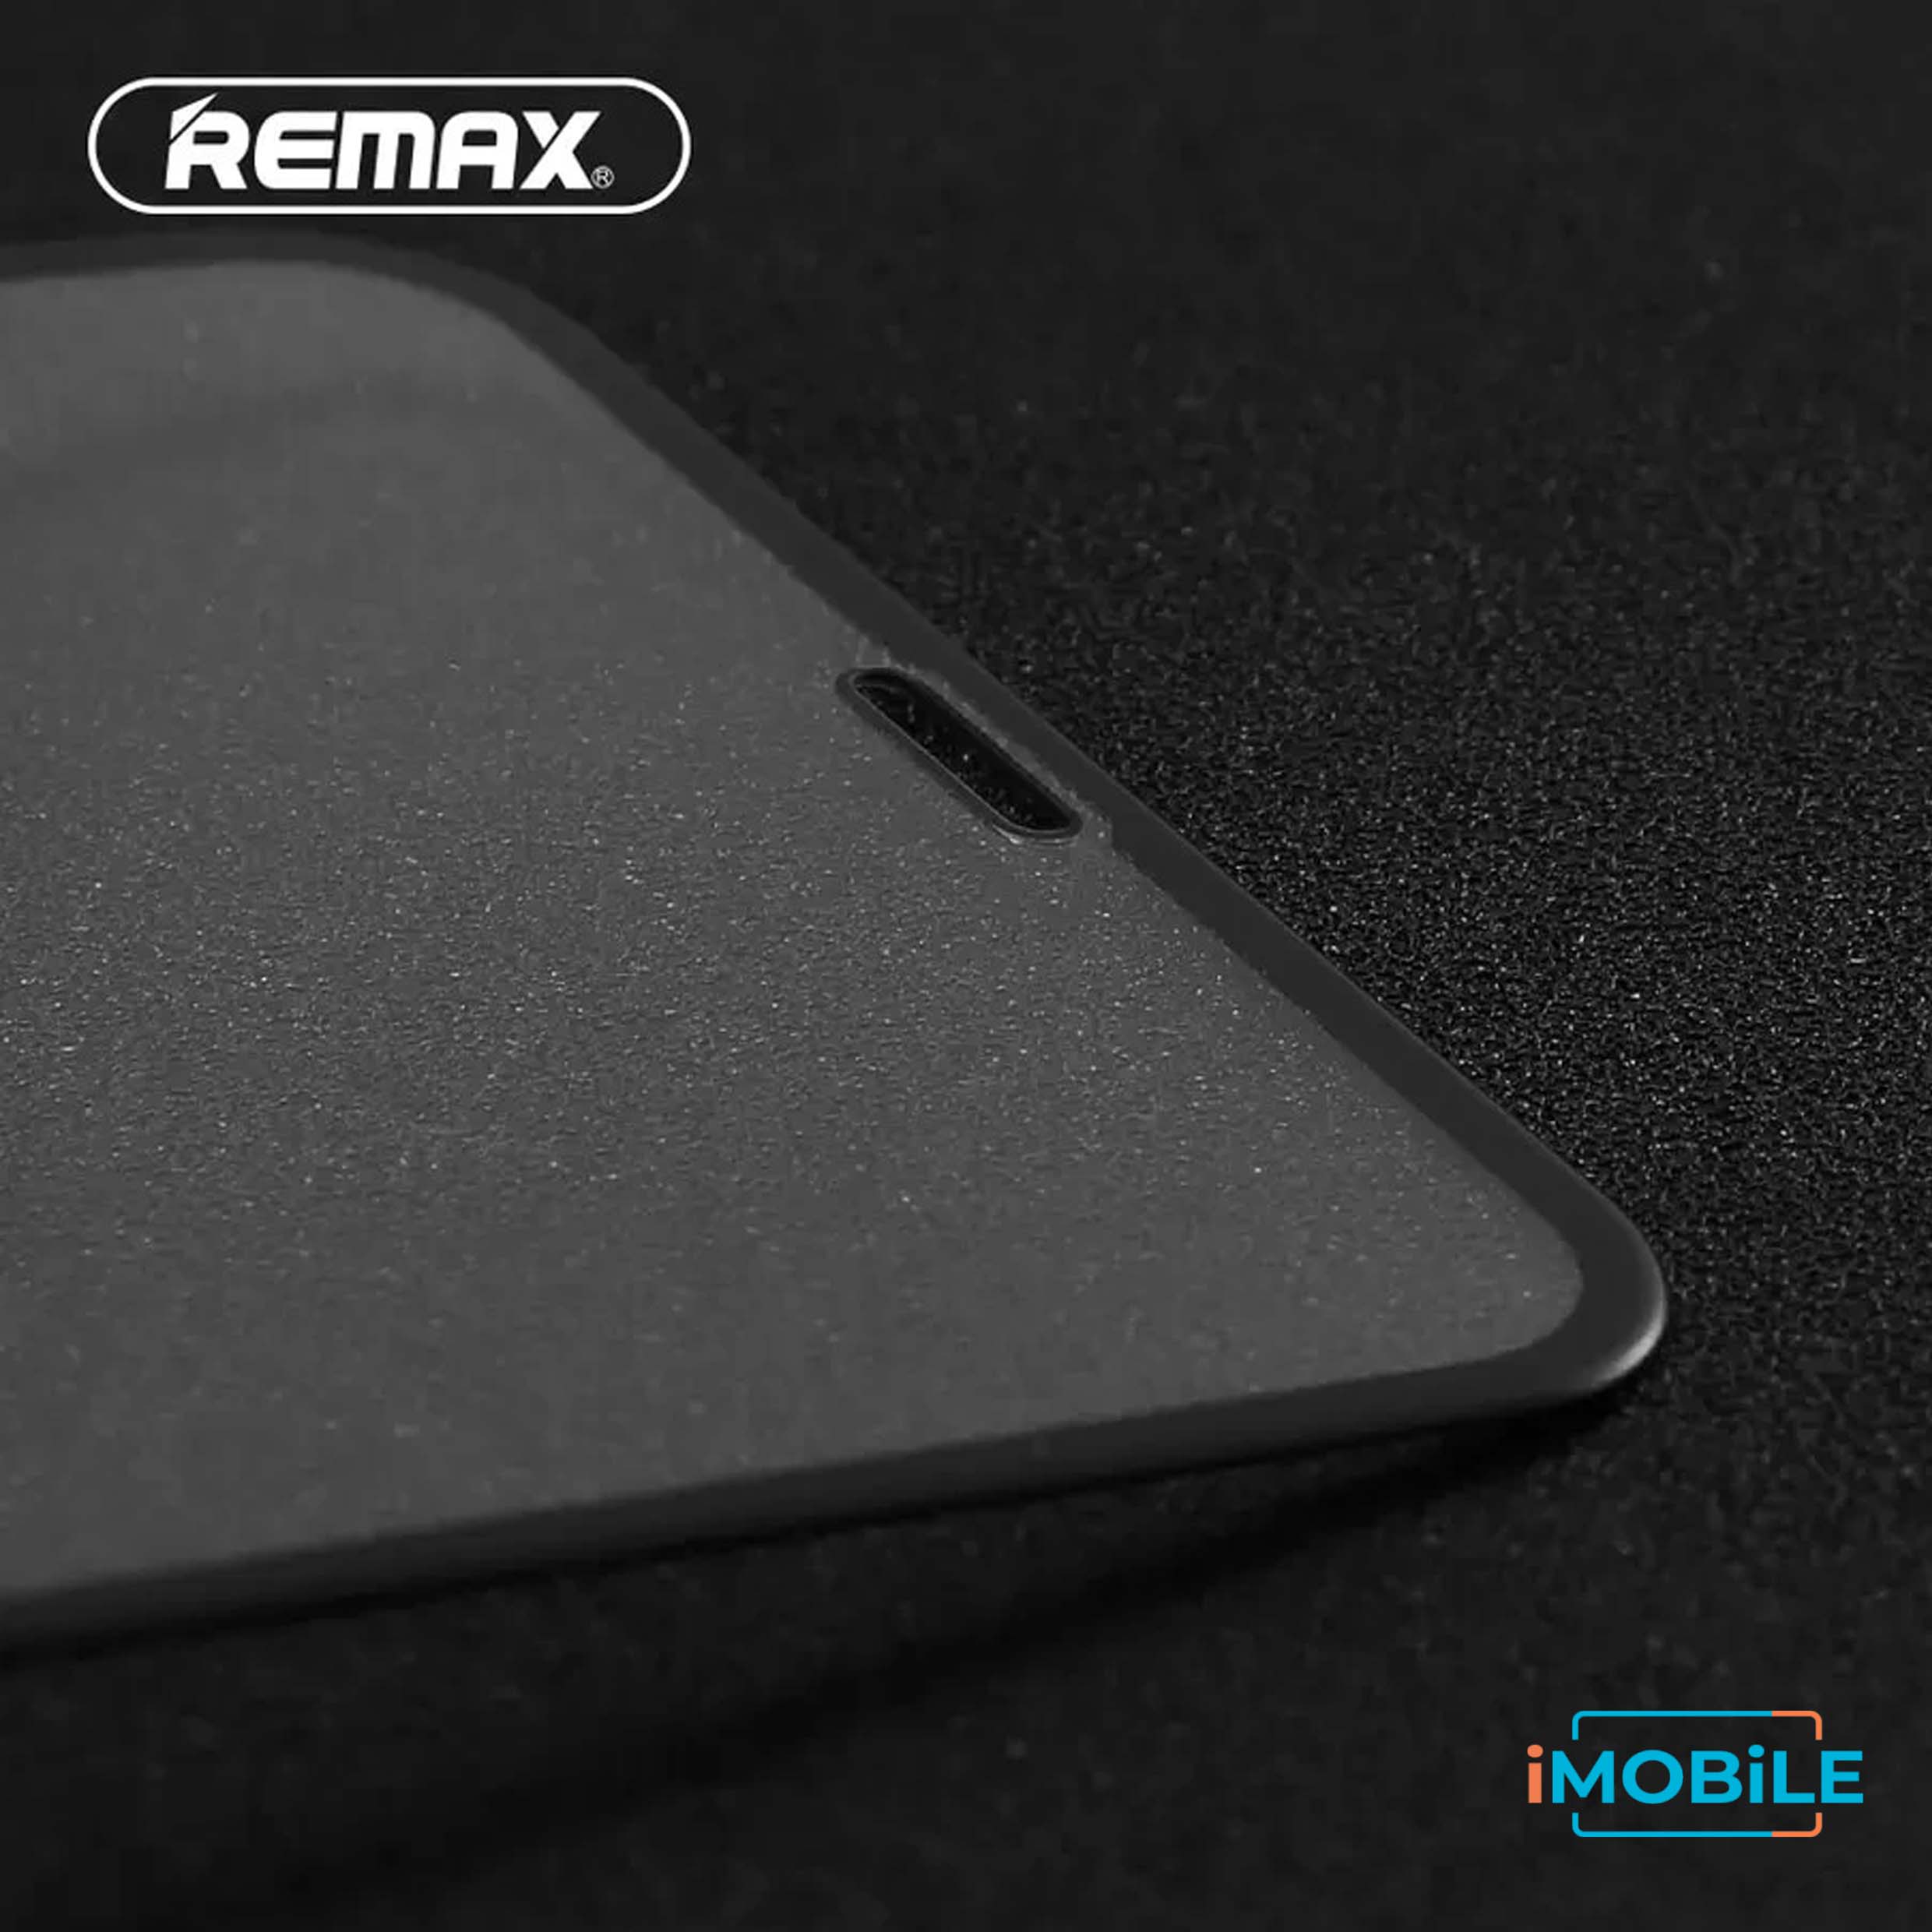 Remax 2.5D Tempered Glass with Envelope Pack, iPhone 7 Plus/8 Plus [Black]